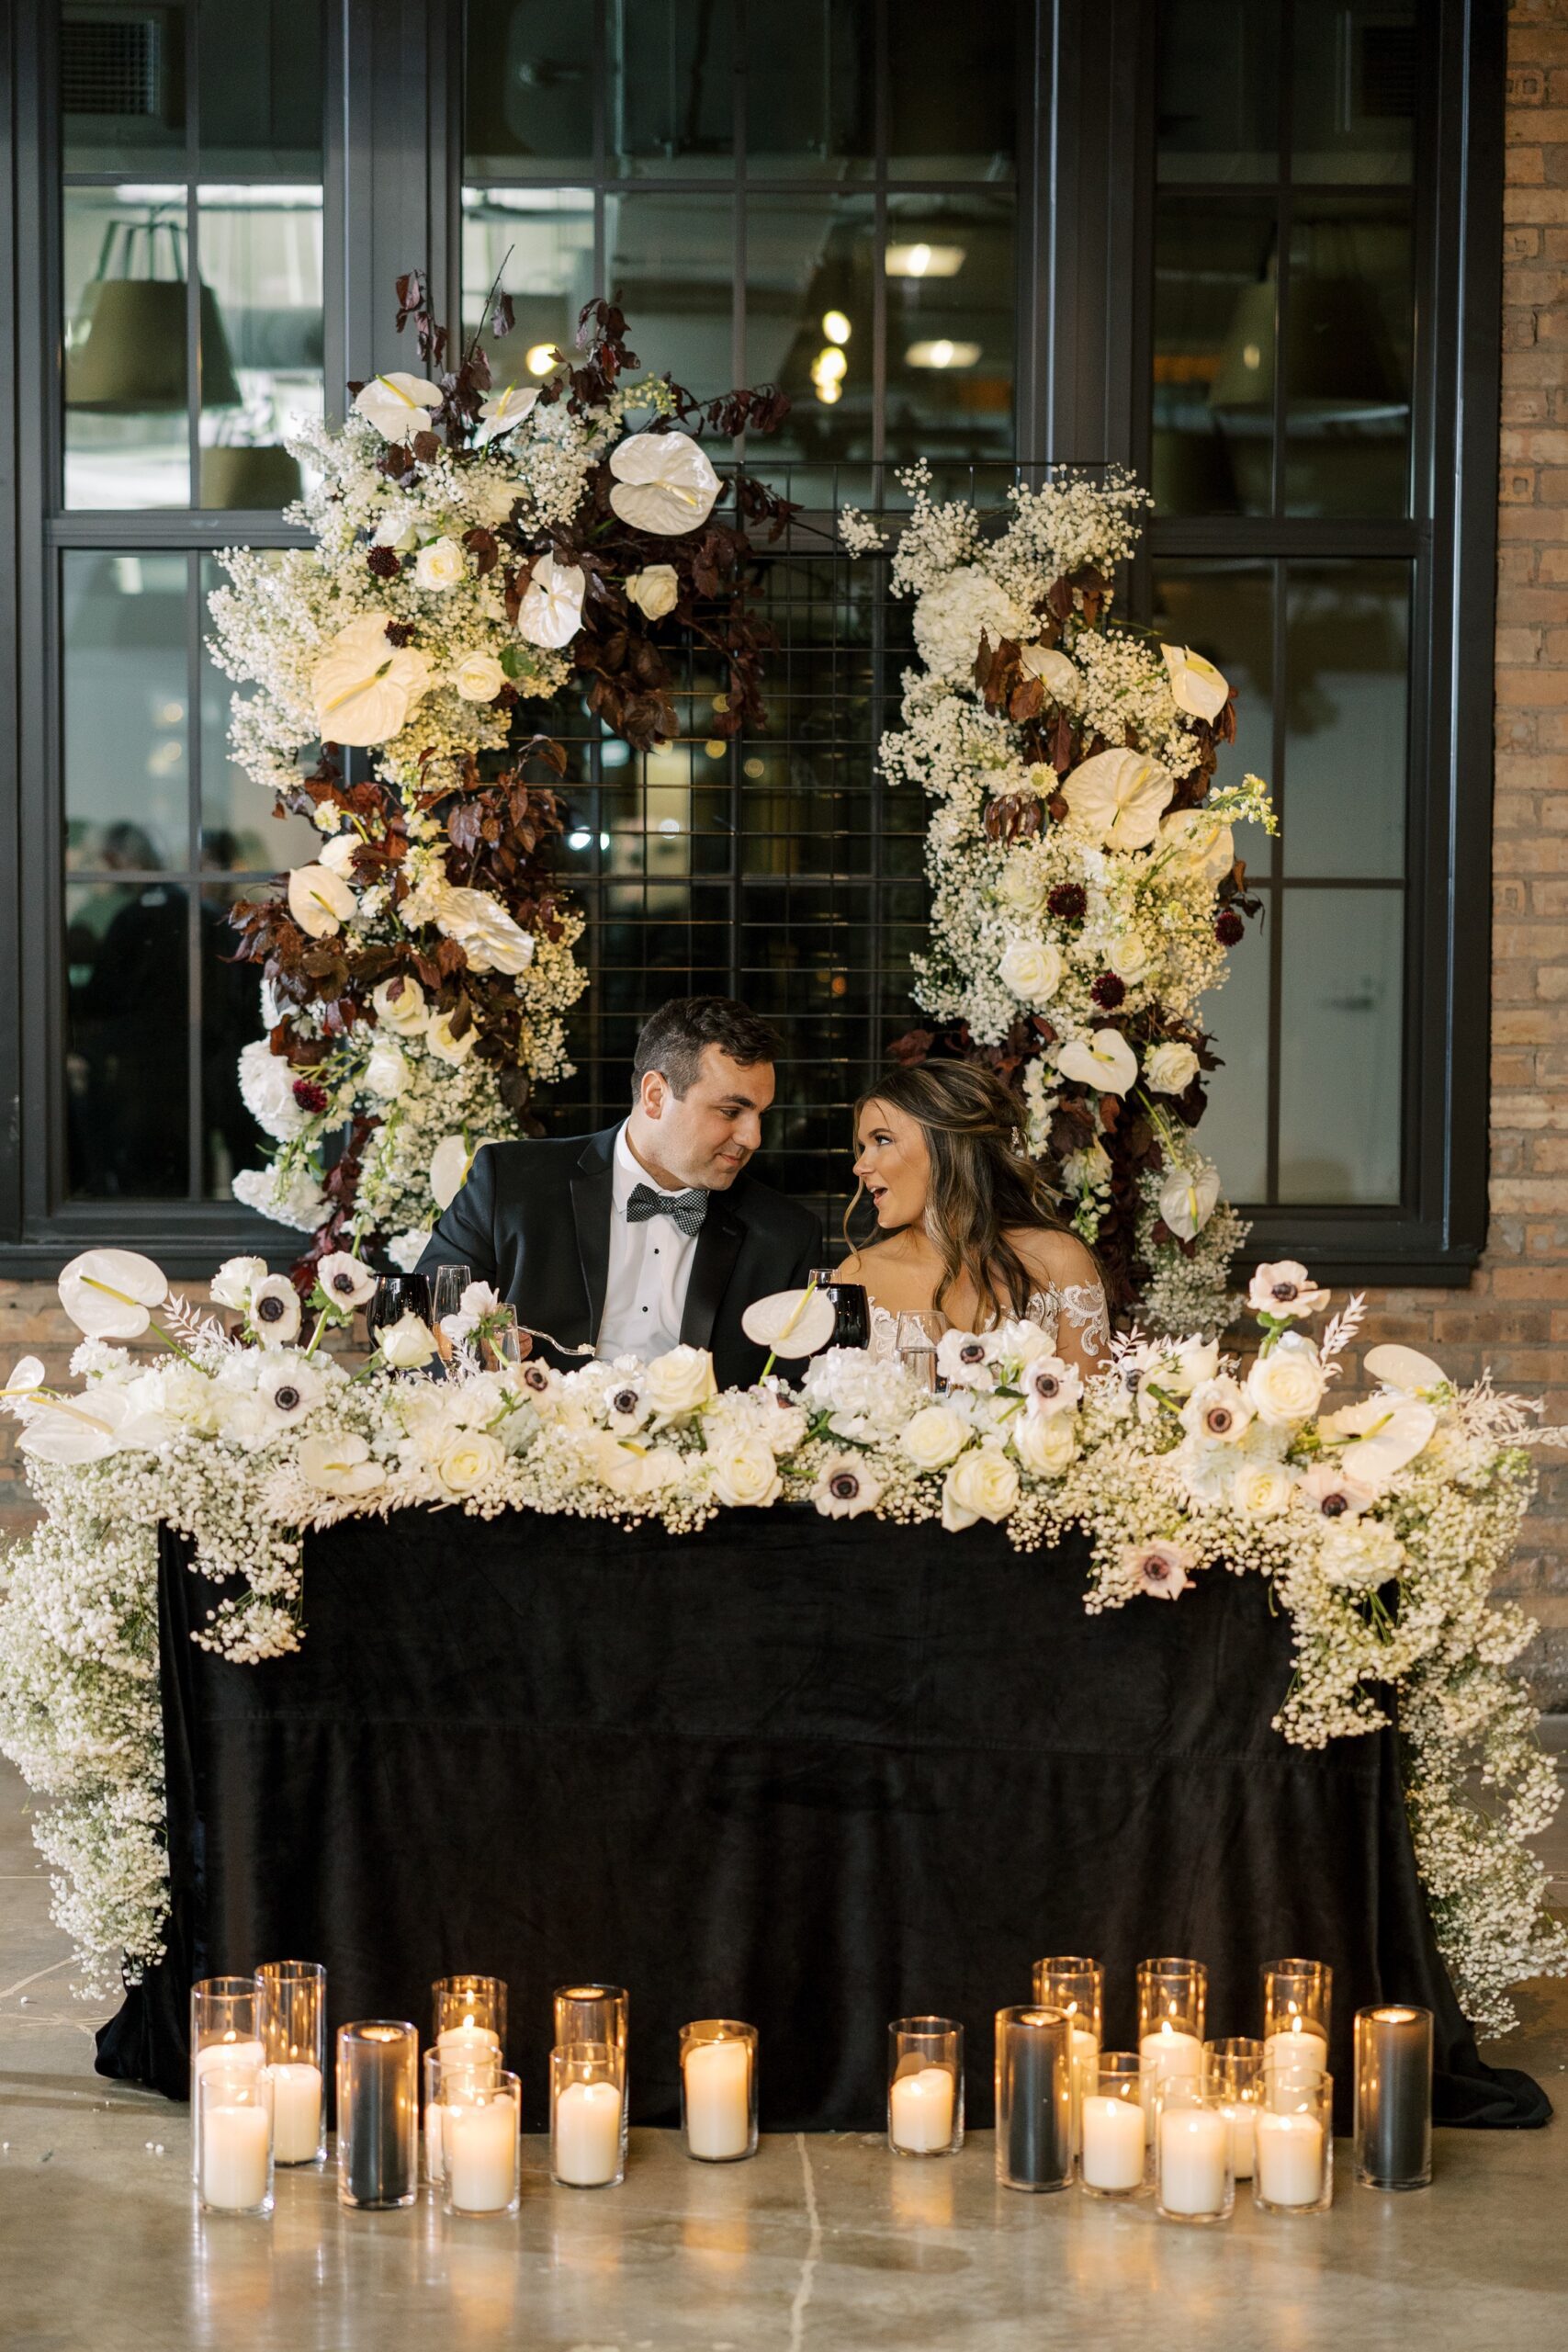 Bride and groom at their sweetheart table at the Old Post Office wedding reception